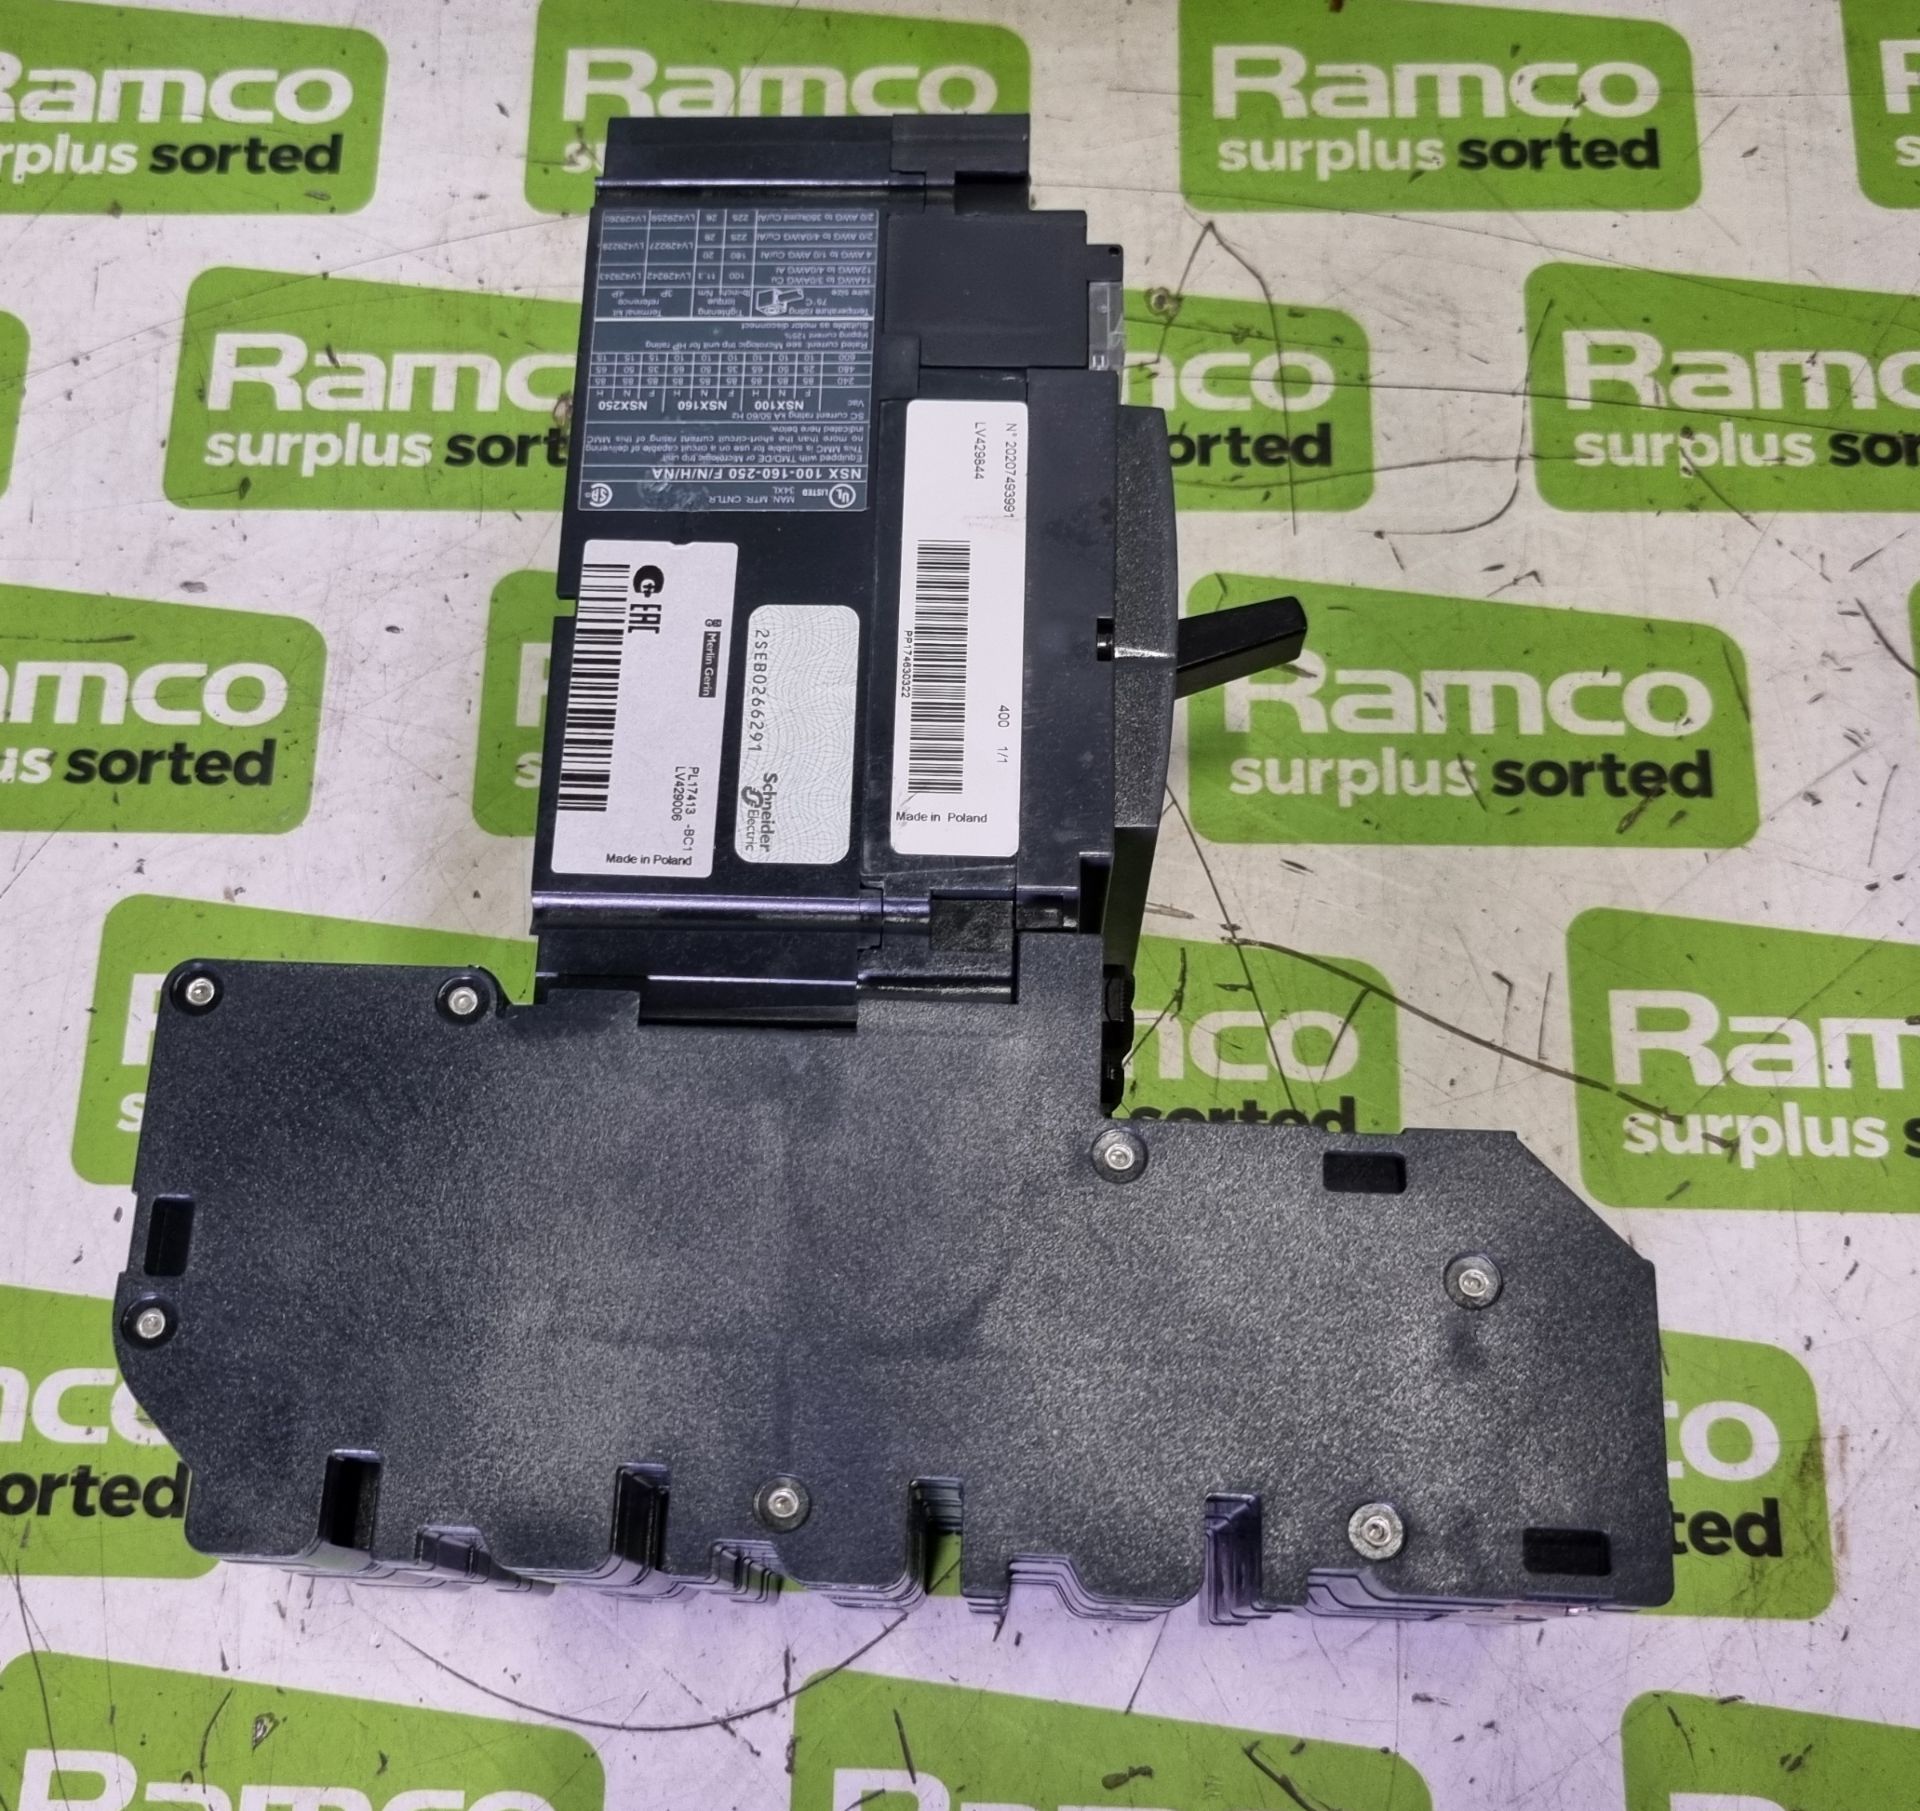 Schneider Electric MGP0403XN Powerpact 4 molded case circuit breaker - 3 phase - 415V - 40A - Image 3 of 6